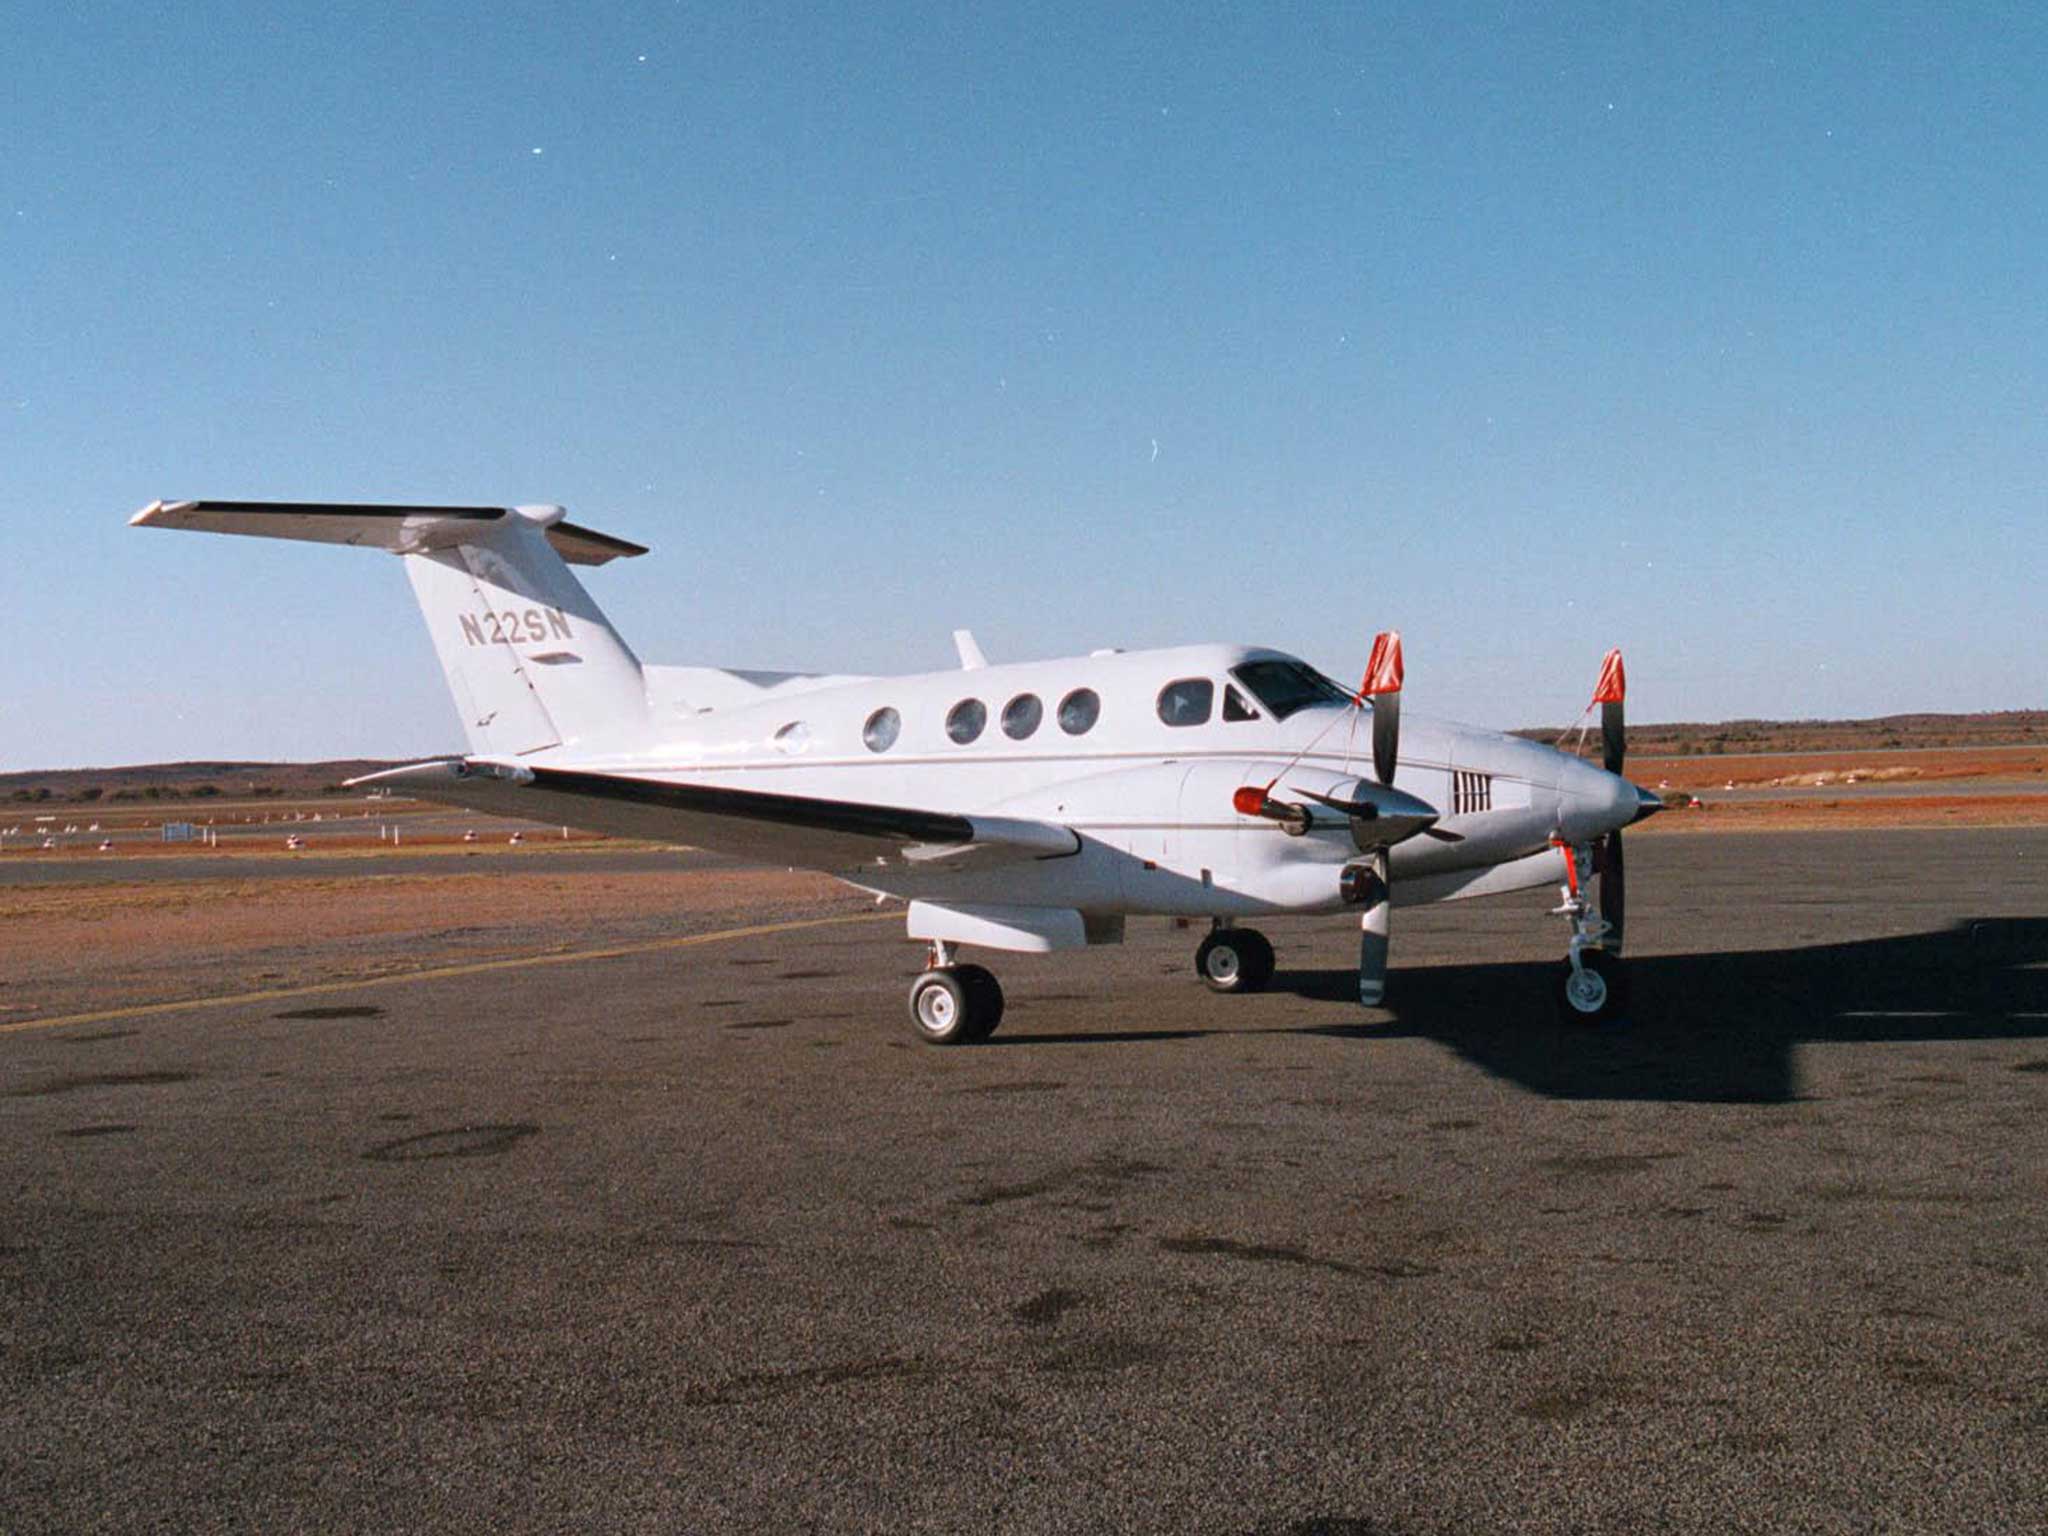 A light aircraft, similar to the one safely landed, sitting on a runway in Australia